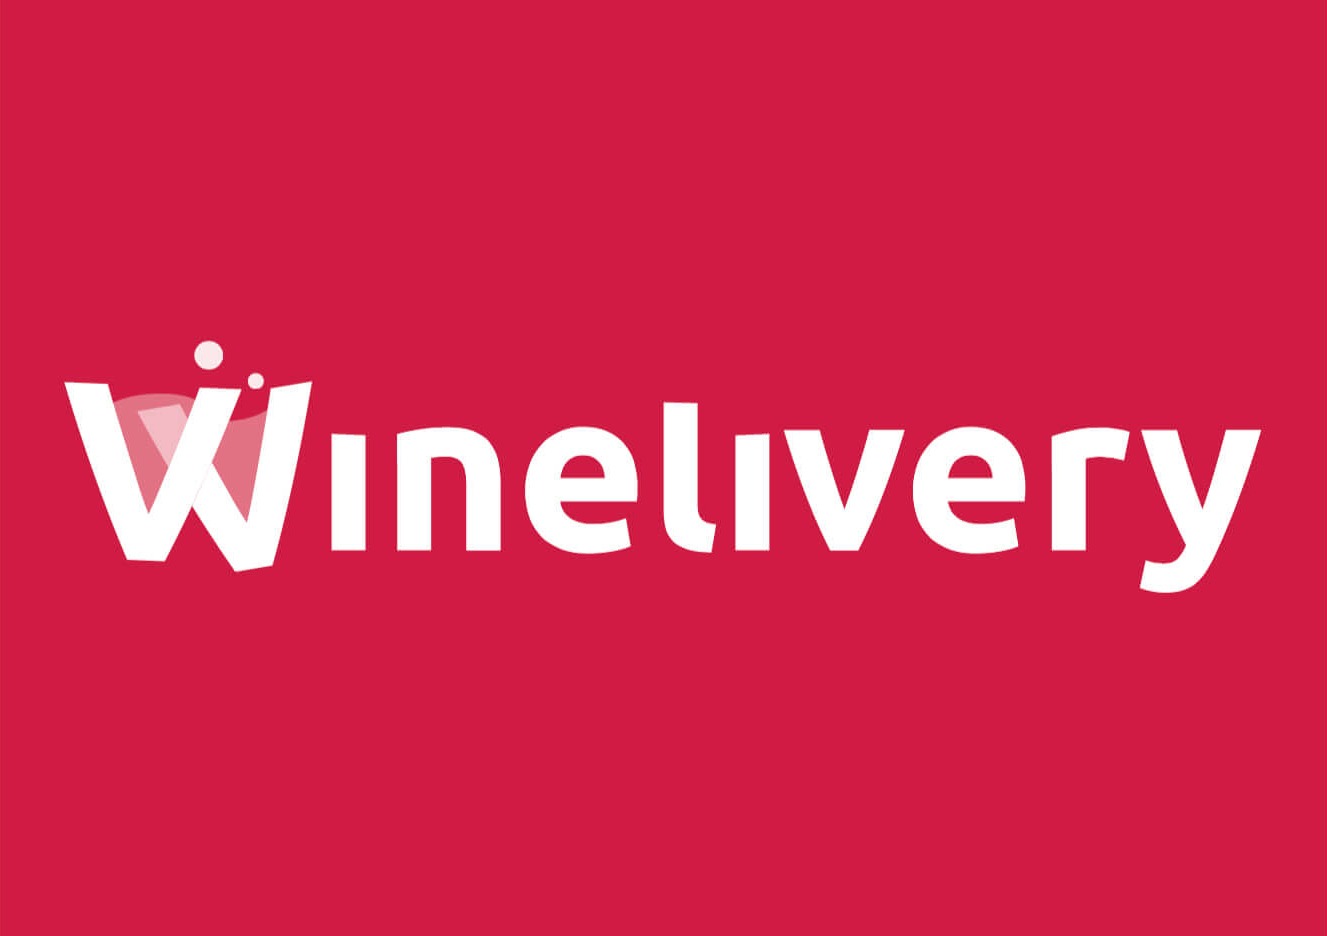 winelivery-marchio-nuovo-rebranding-rosso